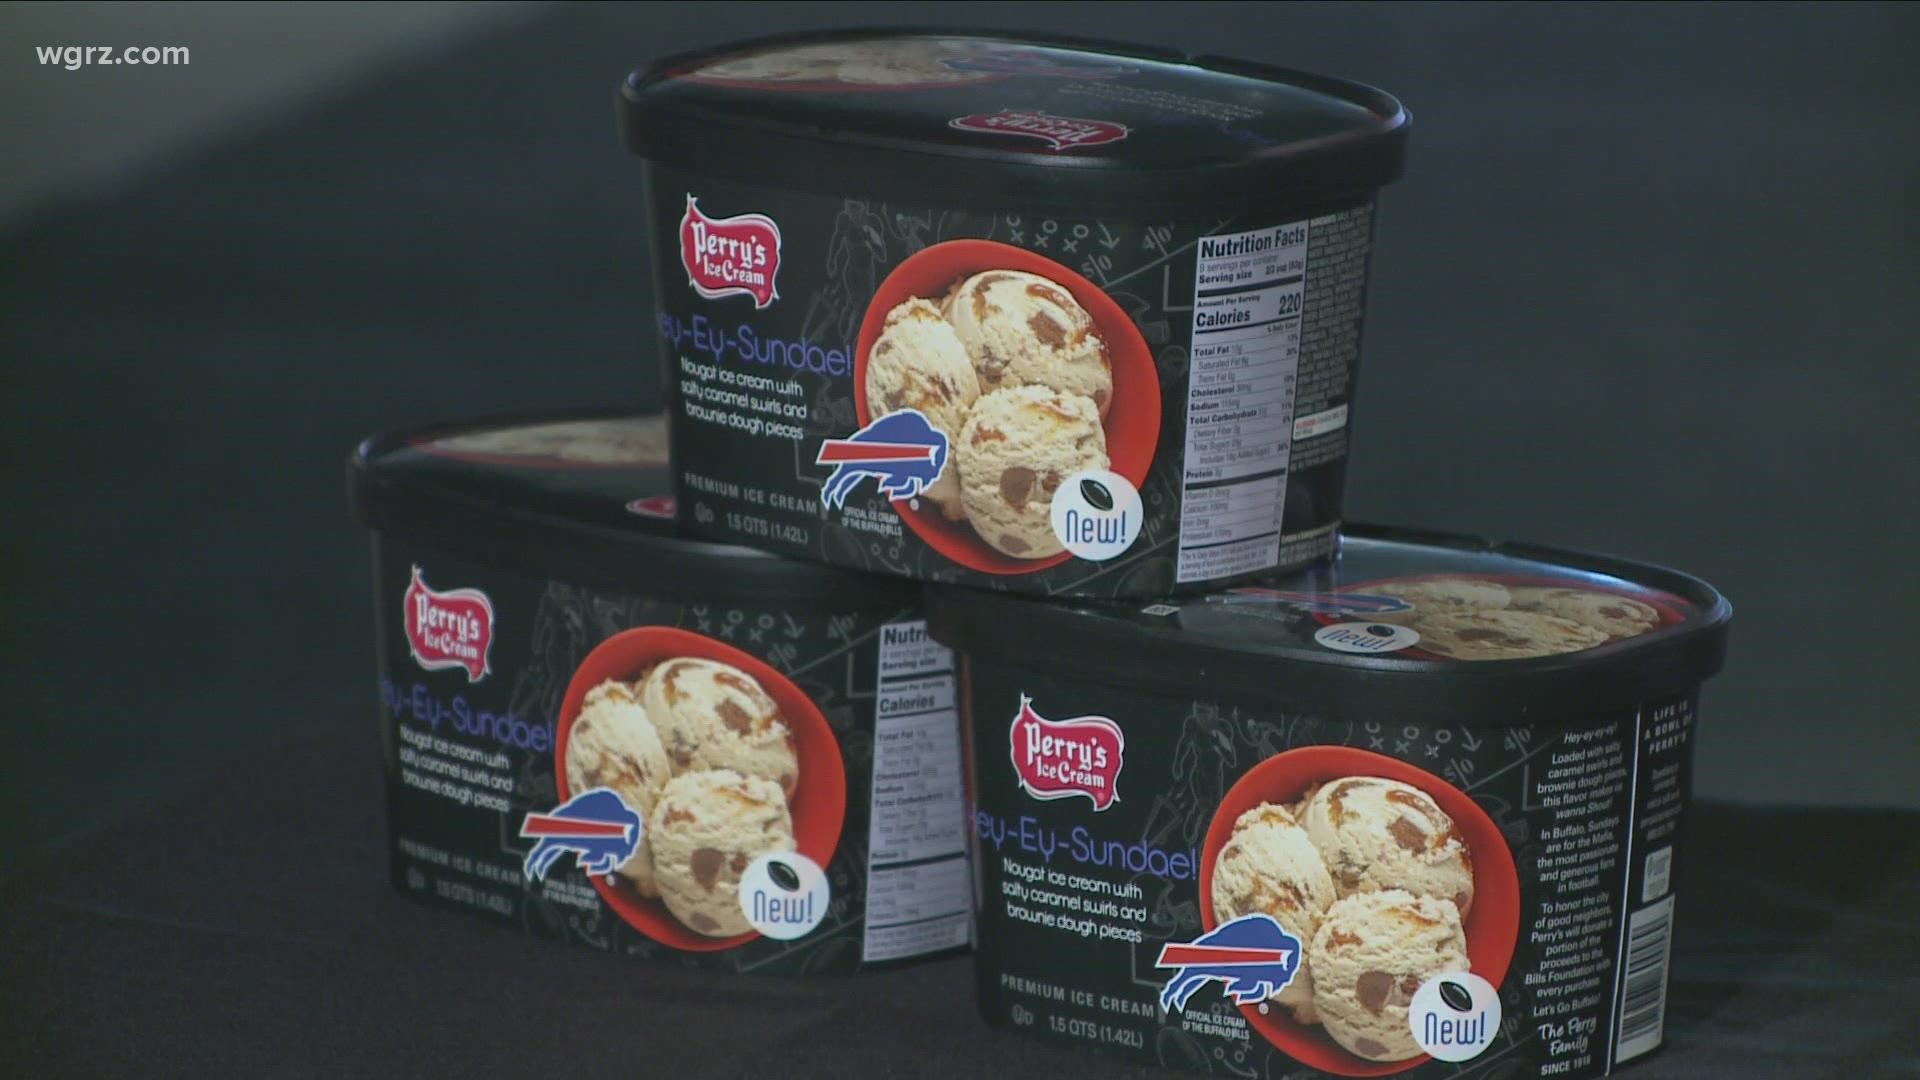 Perry's Introduces New Bills Themed Ice Cream